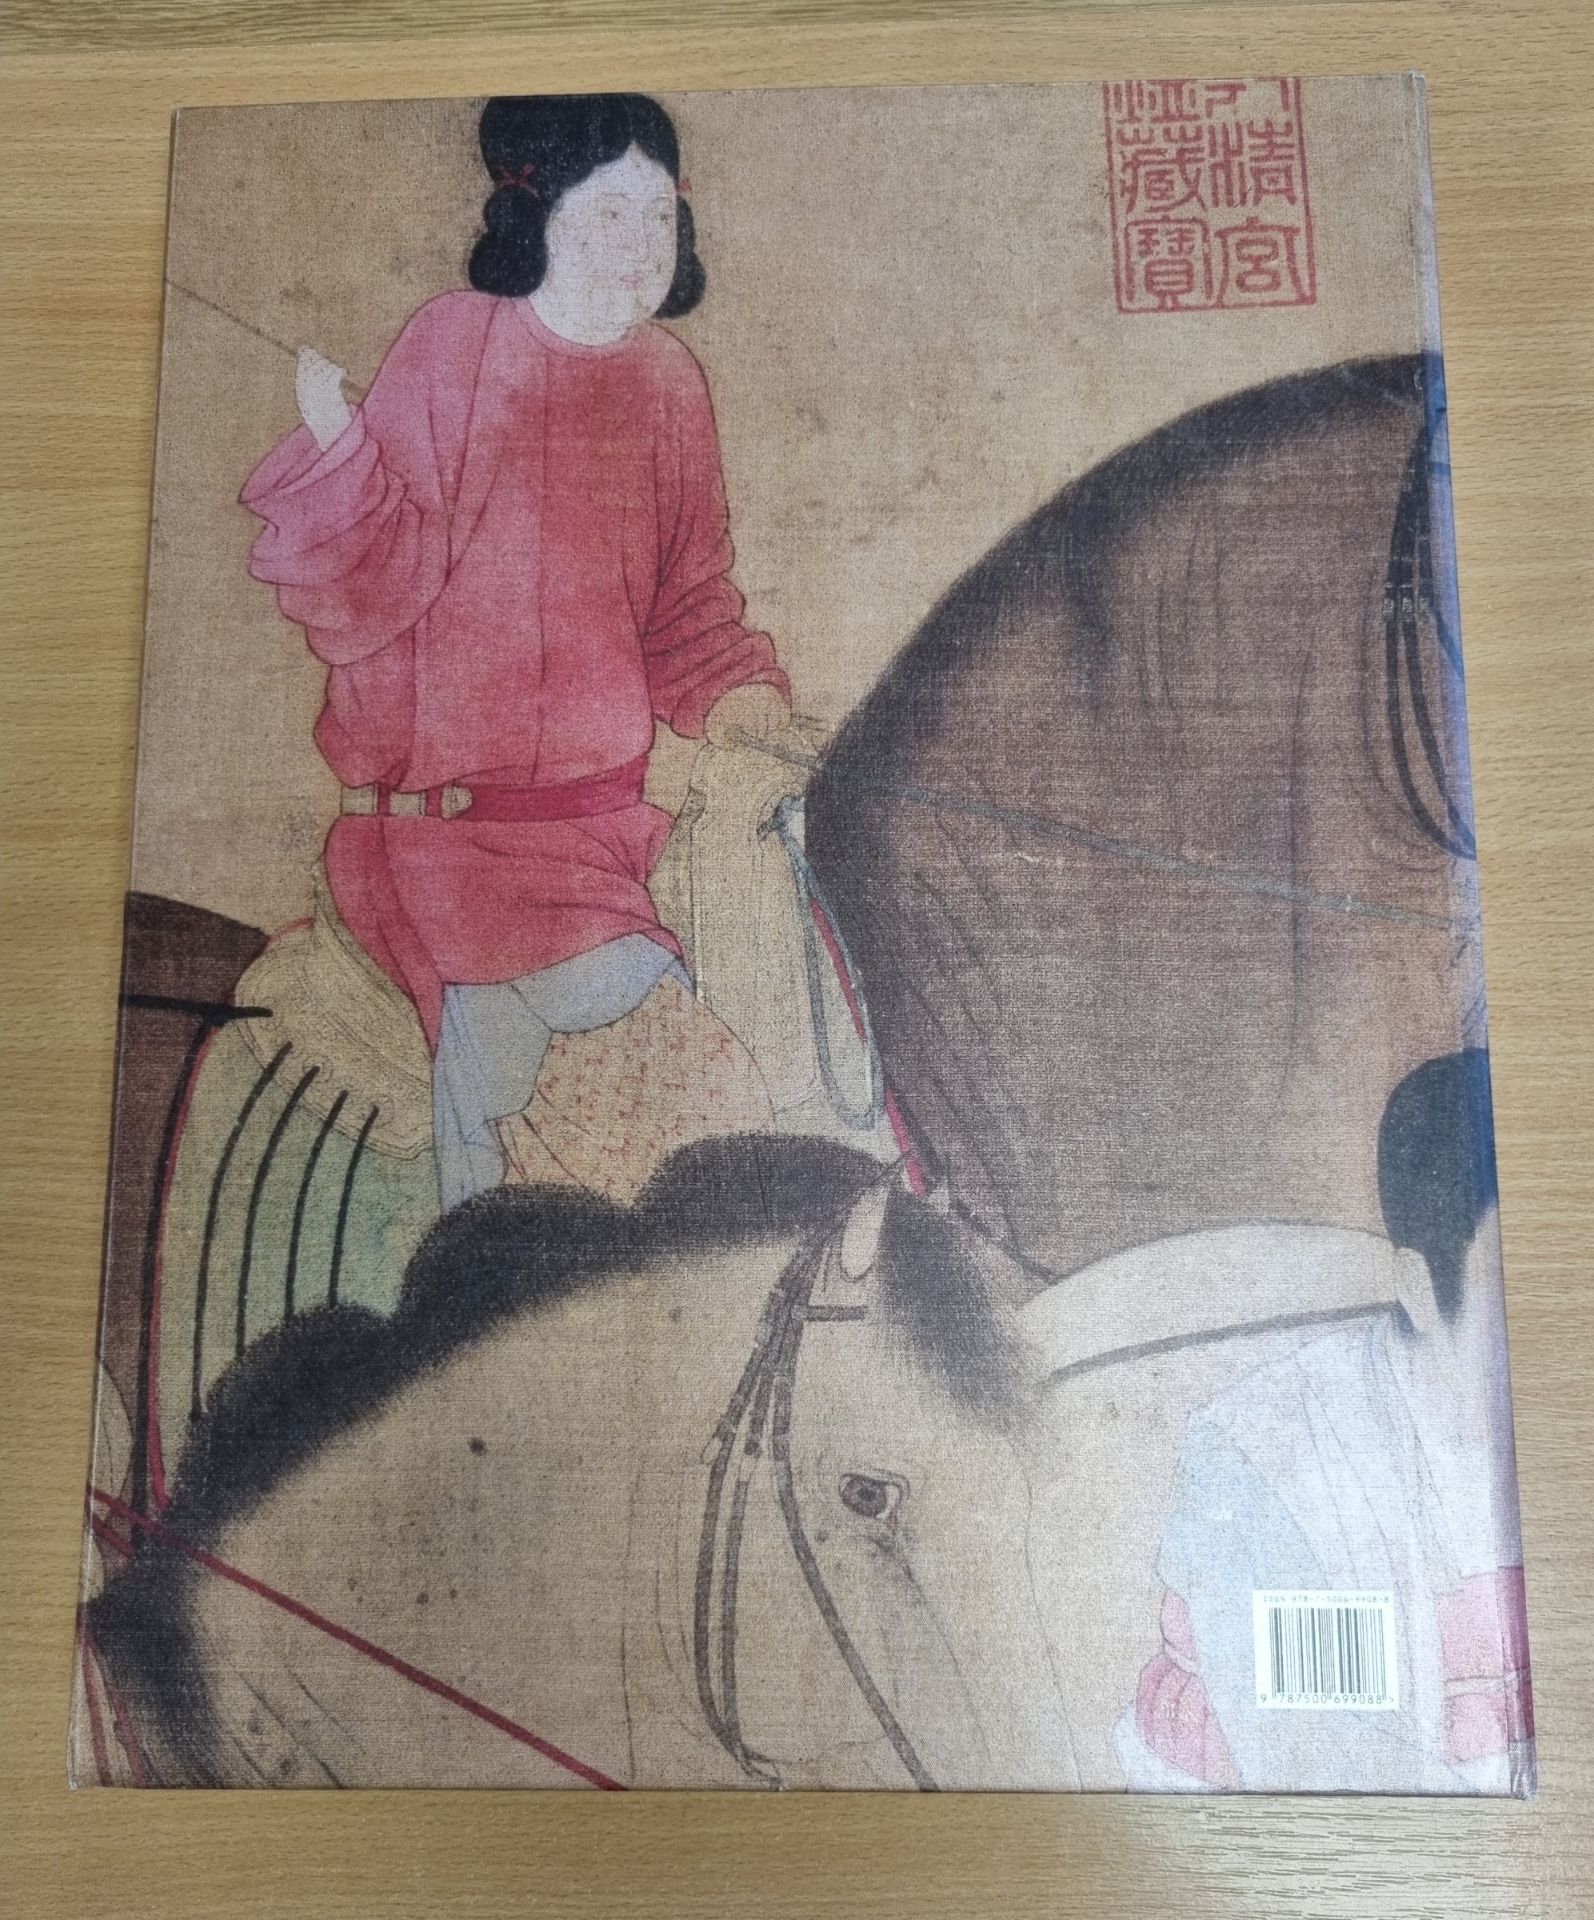 The Most beautiful Chinese classical paintings hardcover book - Image 7 of 7